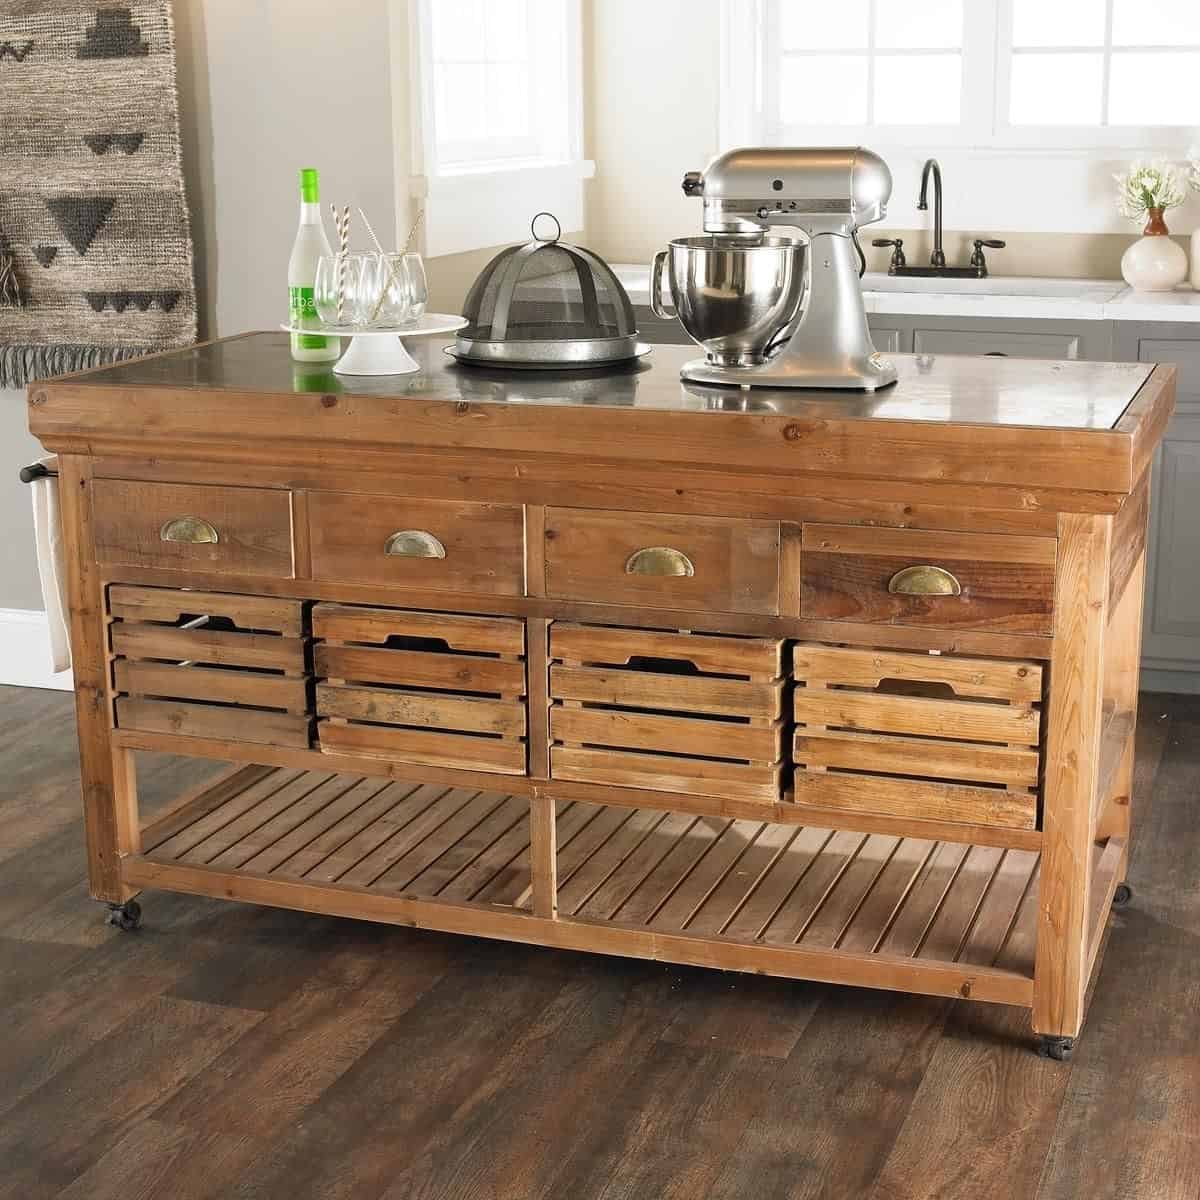 Rustic Kitchen Table With Storage